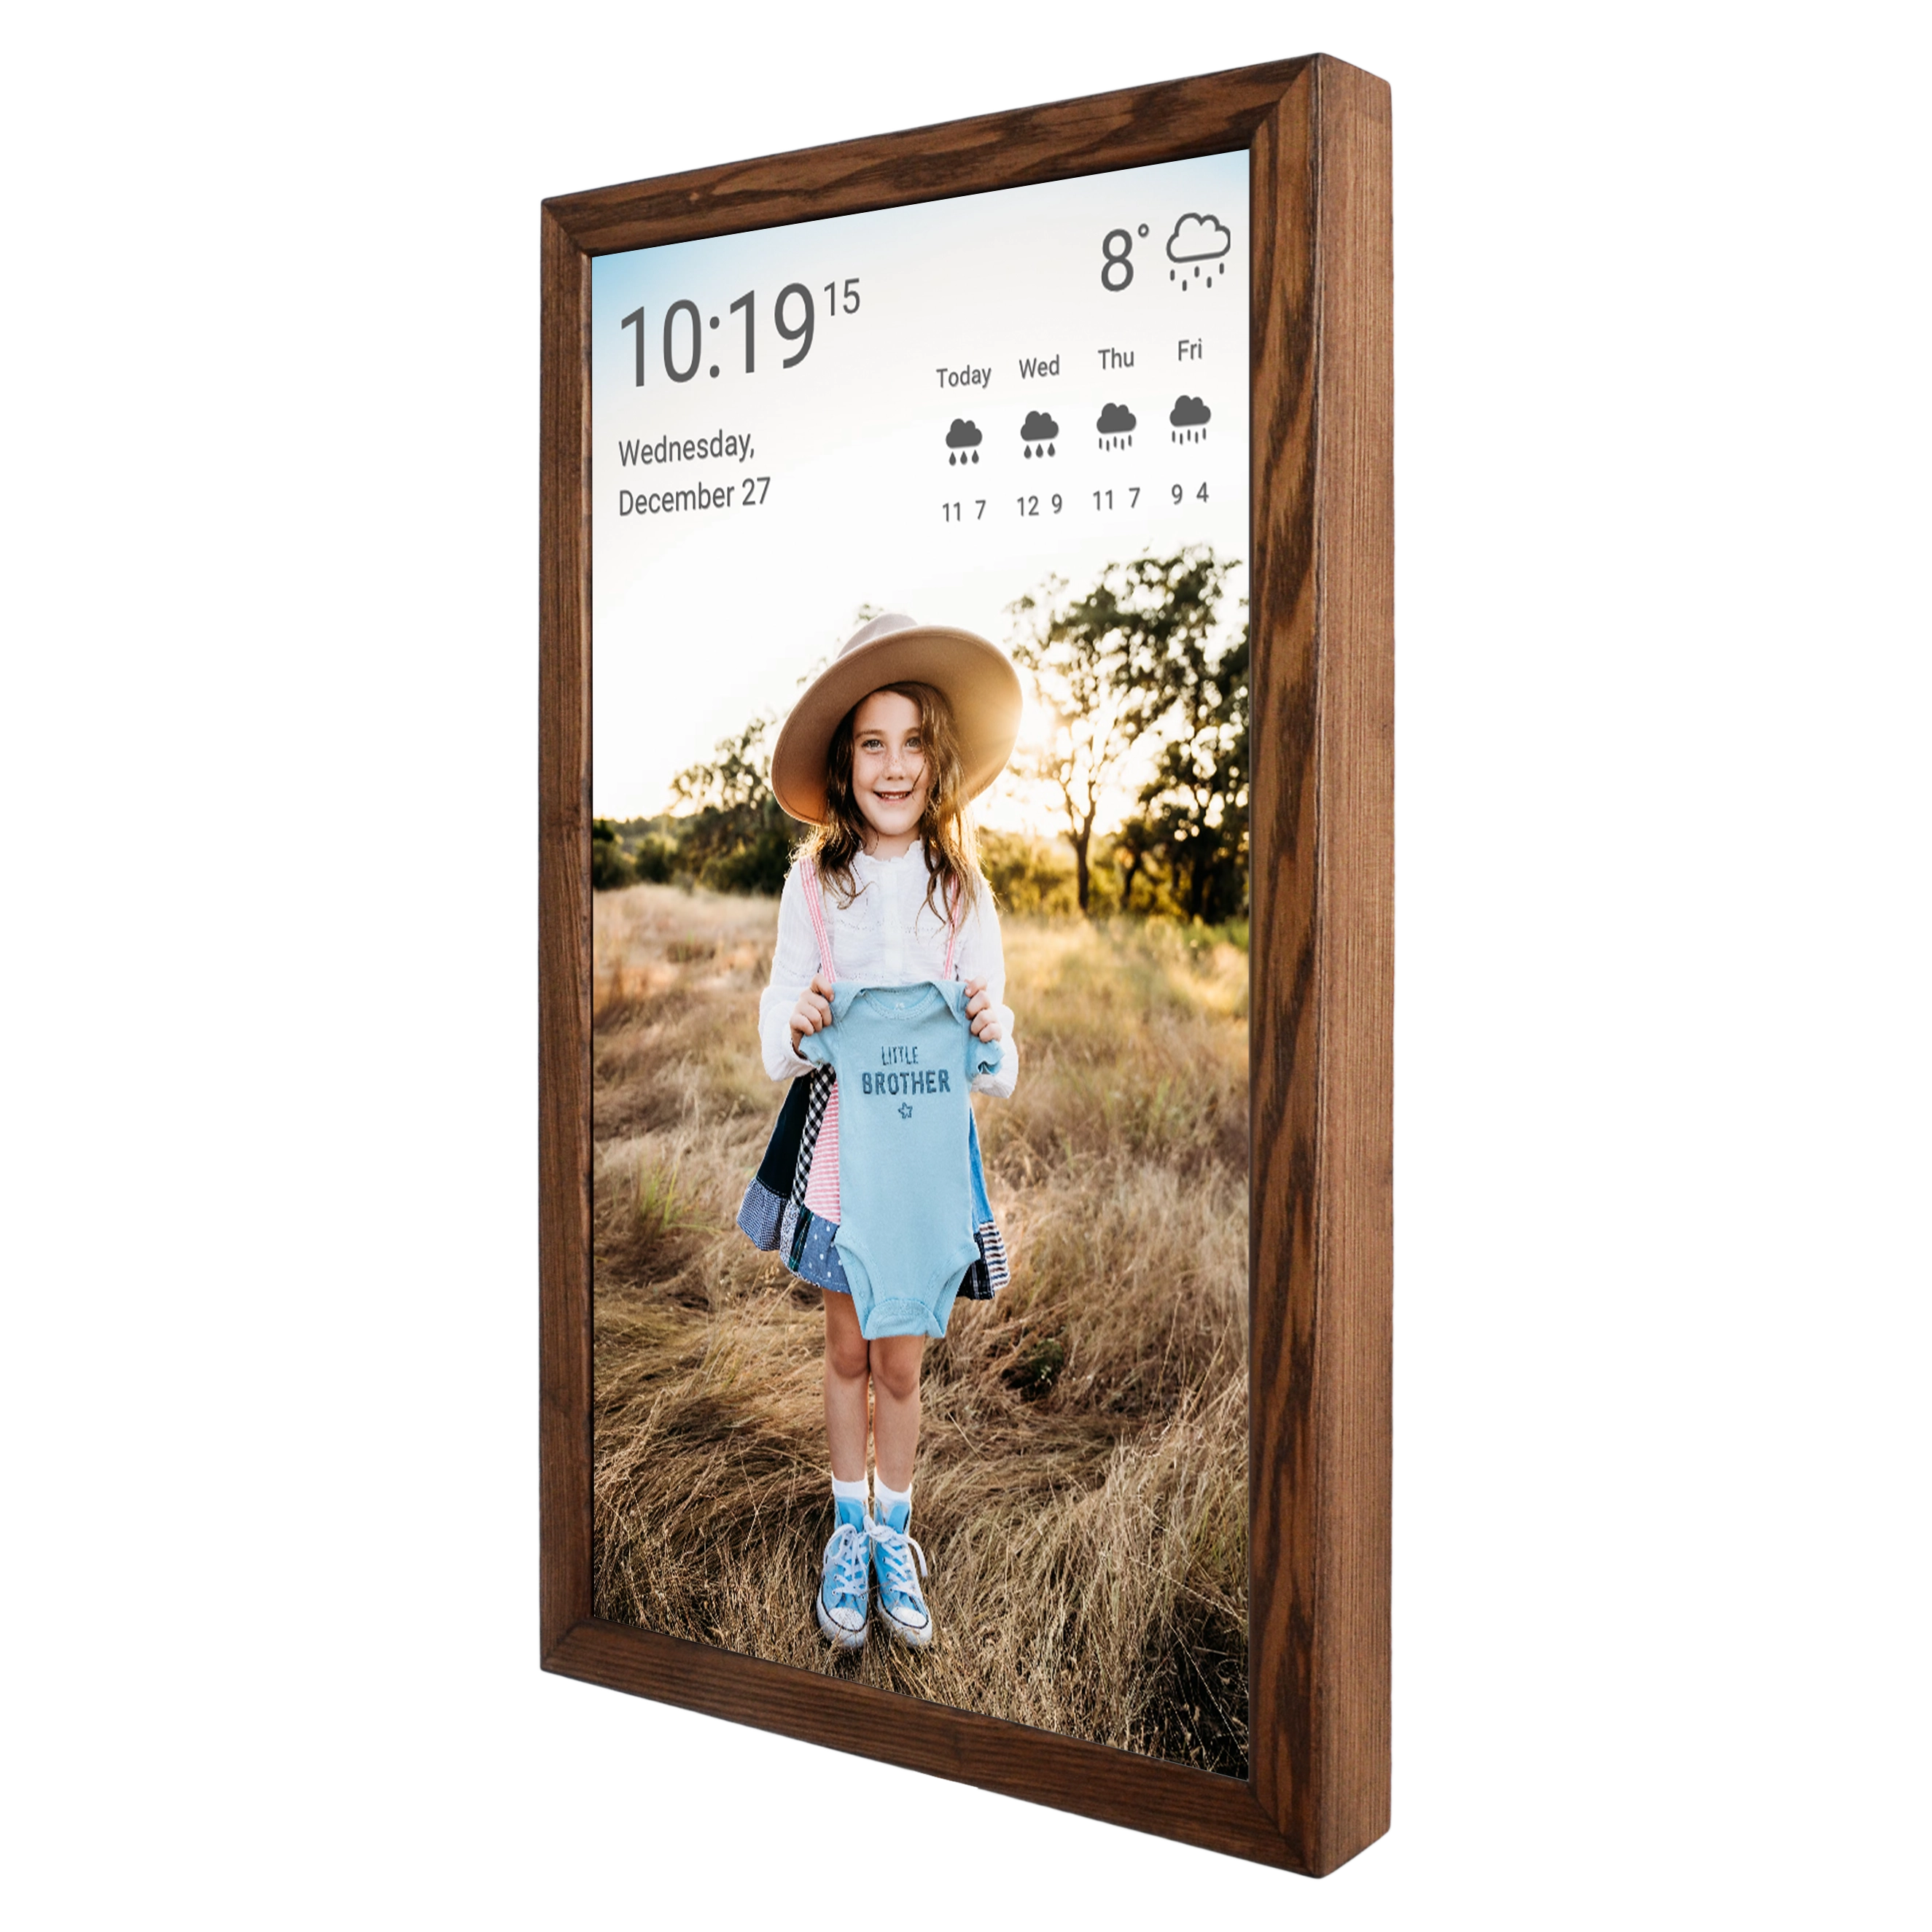 Touch Screen Wall Display 24 Inch in Wooden Frame